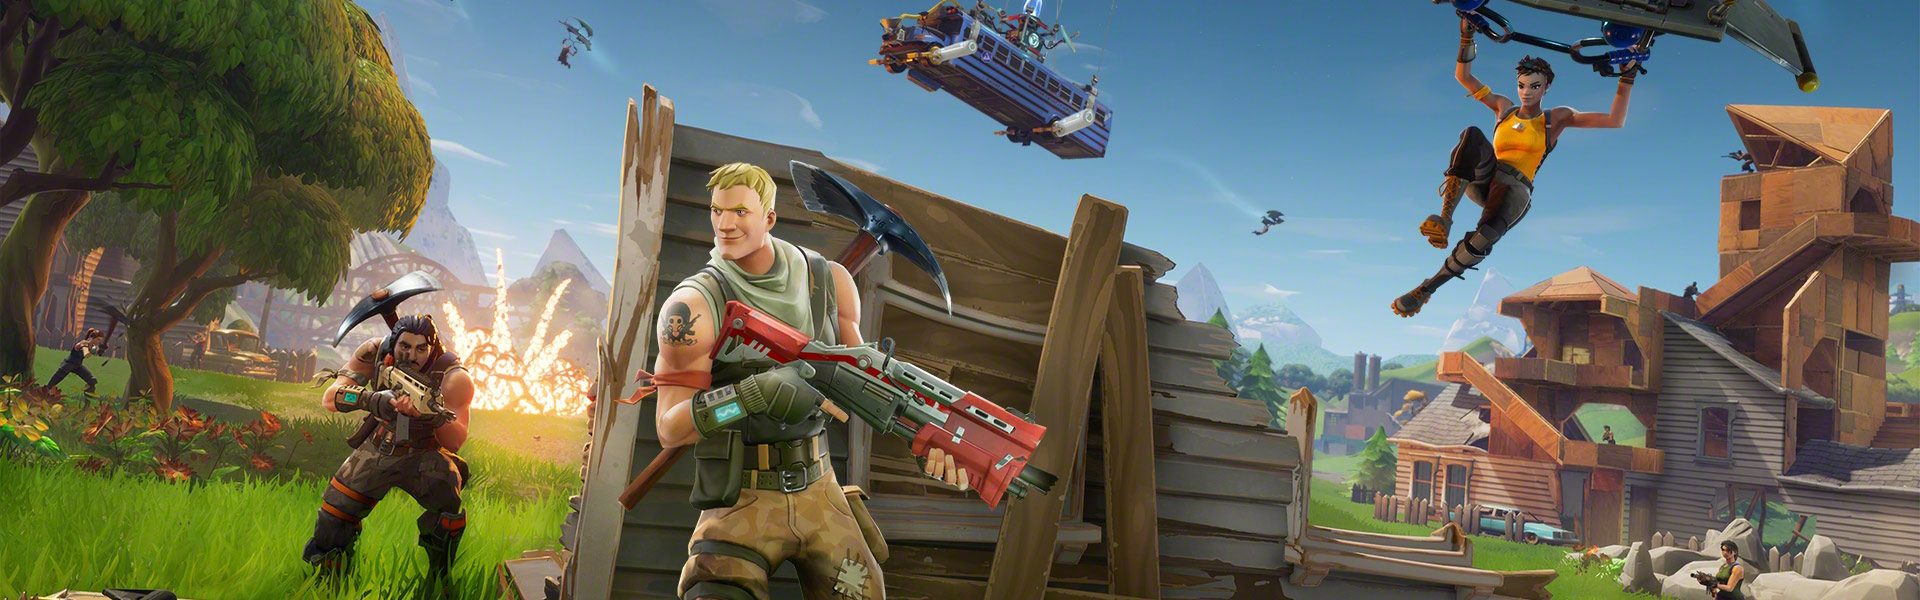 Extended Fortnite Cross Play Beta Launches On Playstation 4 Playstation Blog